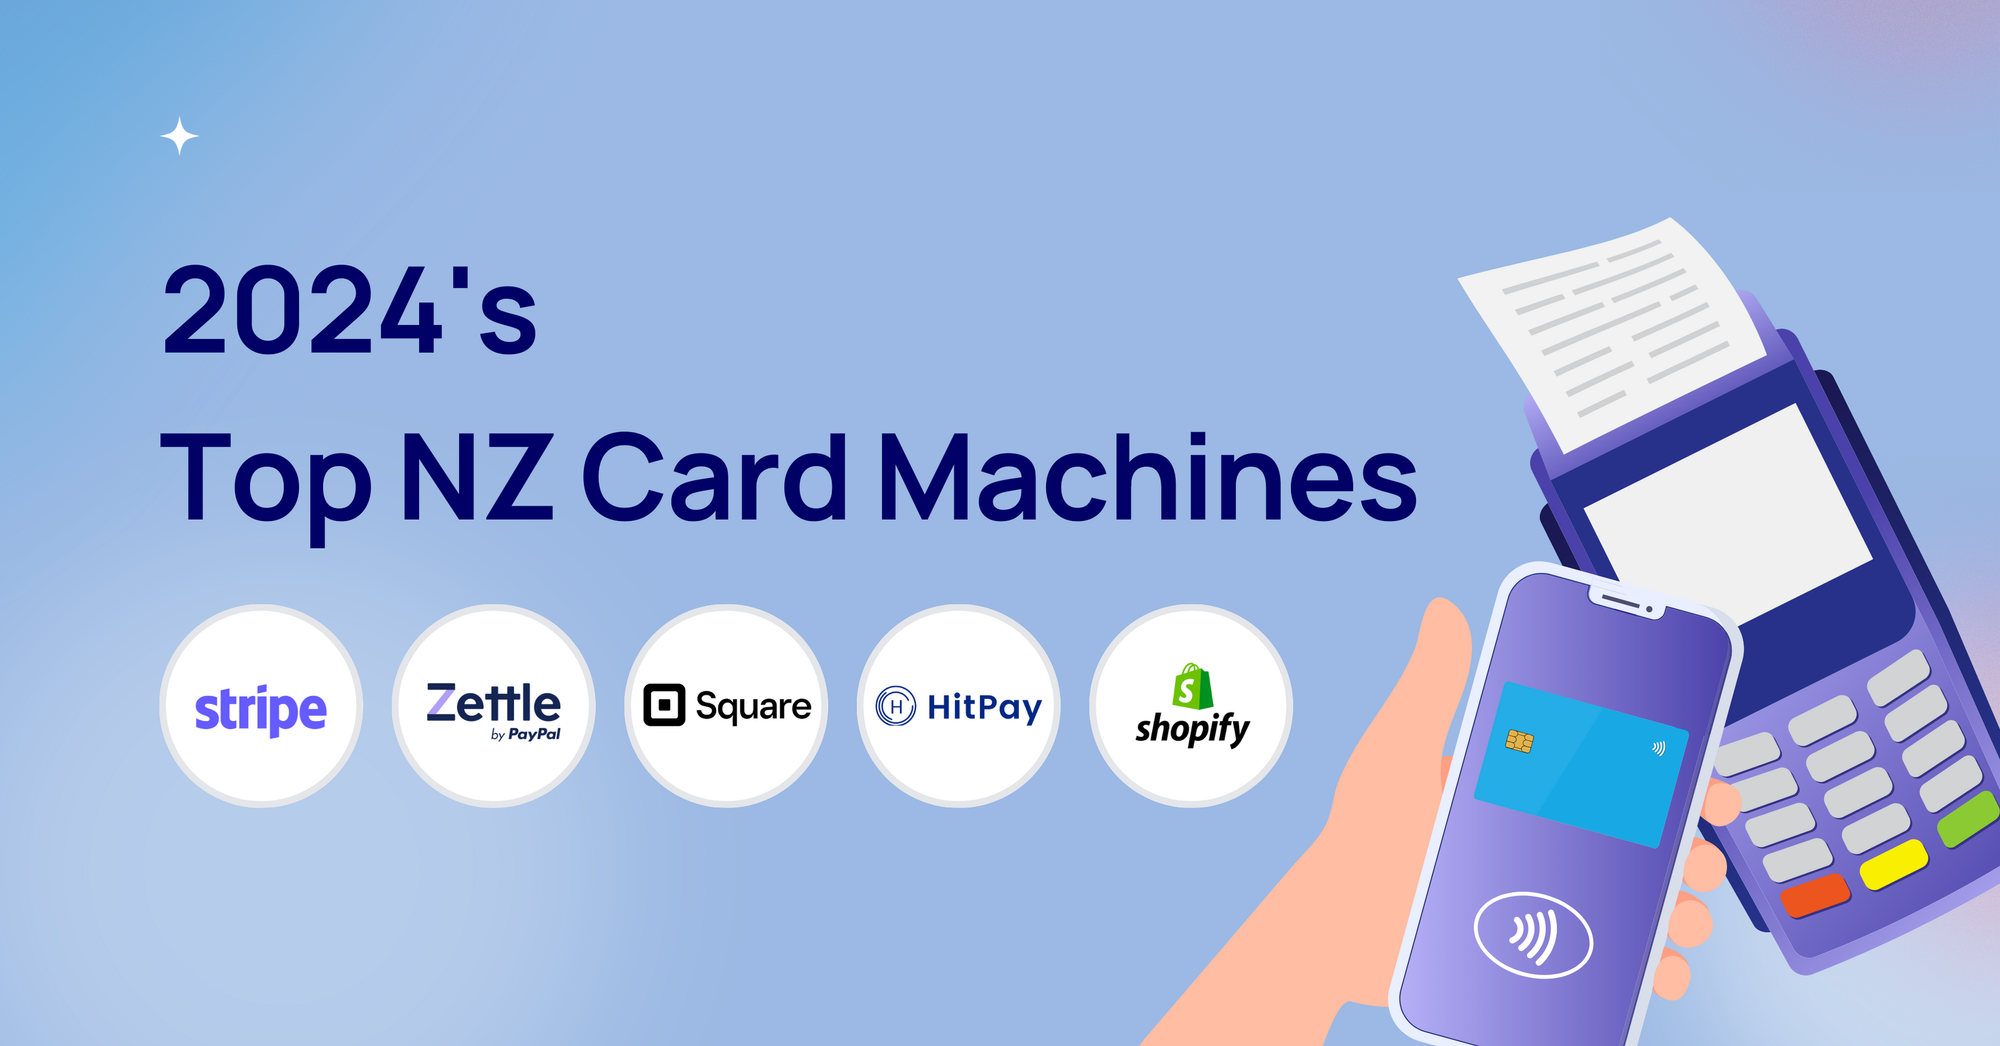 2024's Top NZ Card Machines: Stripe, Zettle, Square, HitPay, Shopify